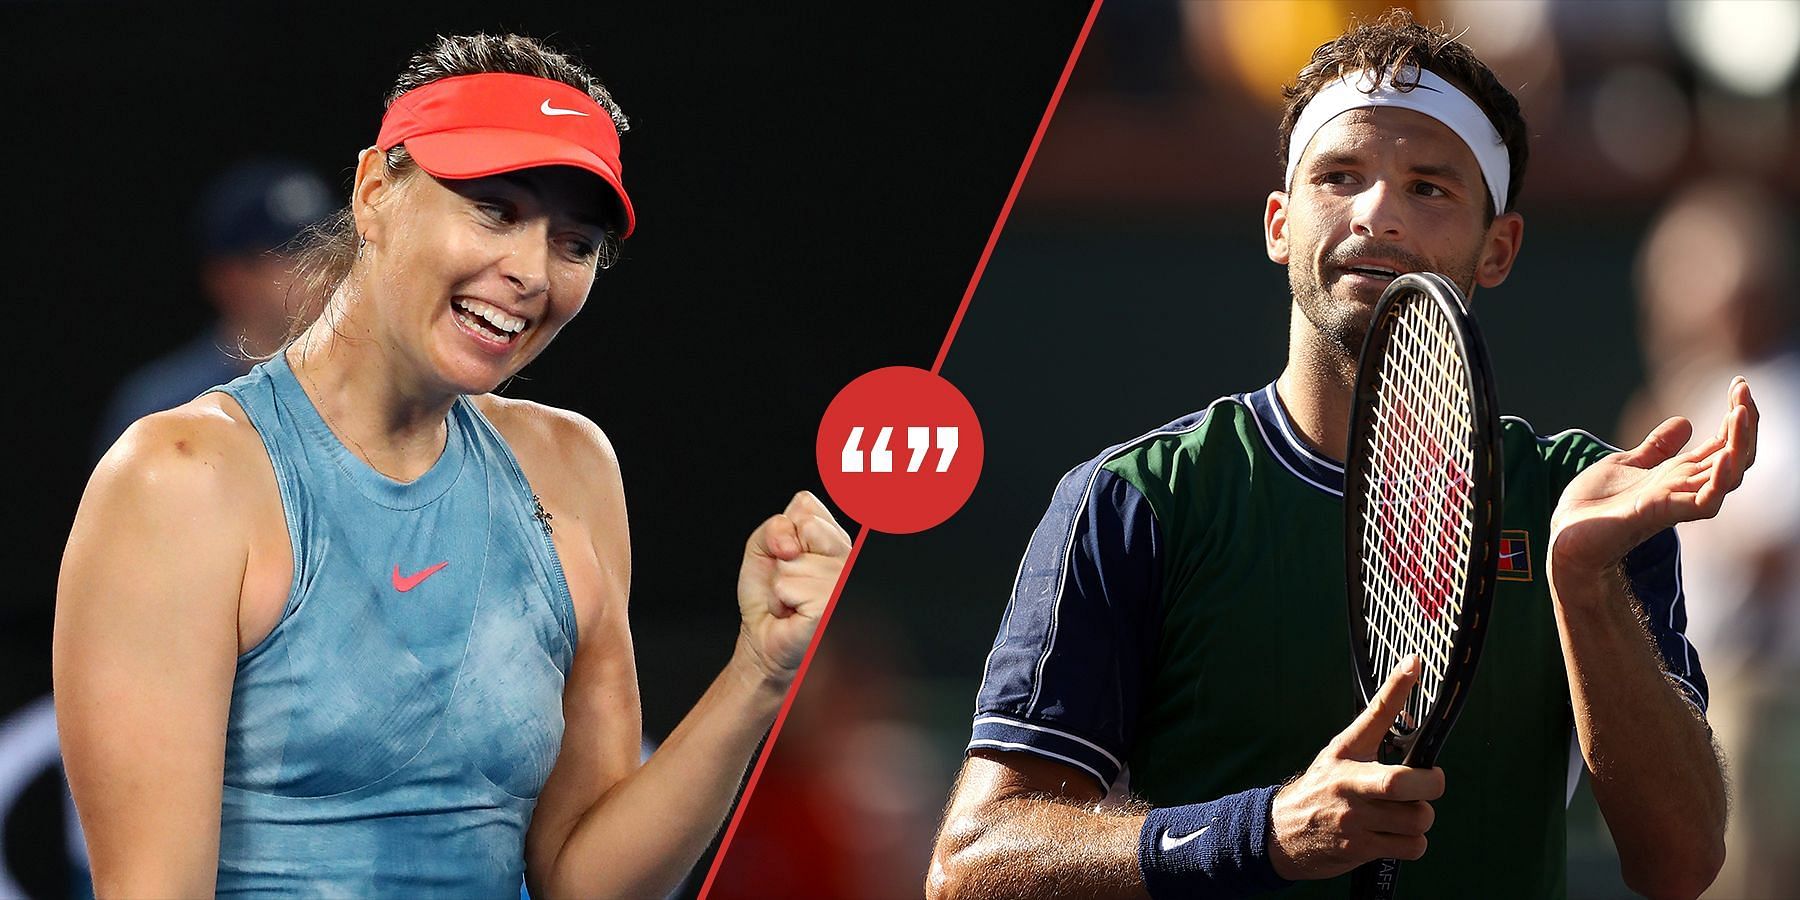 5 tennis players who dated other tennis players ft. Maria Sharapova & Grigor Dimitrov